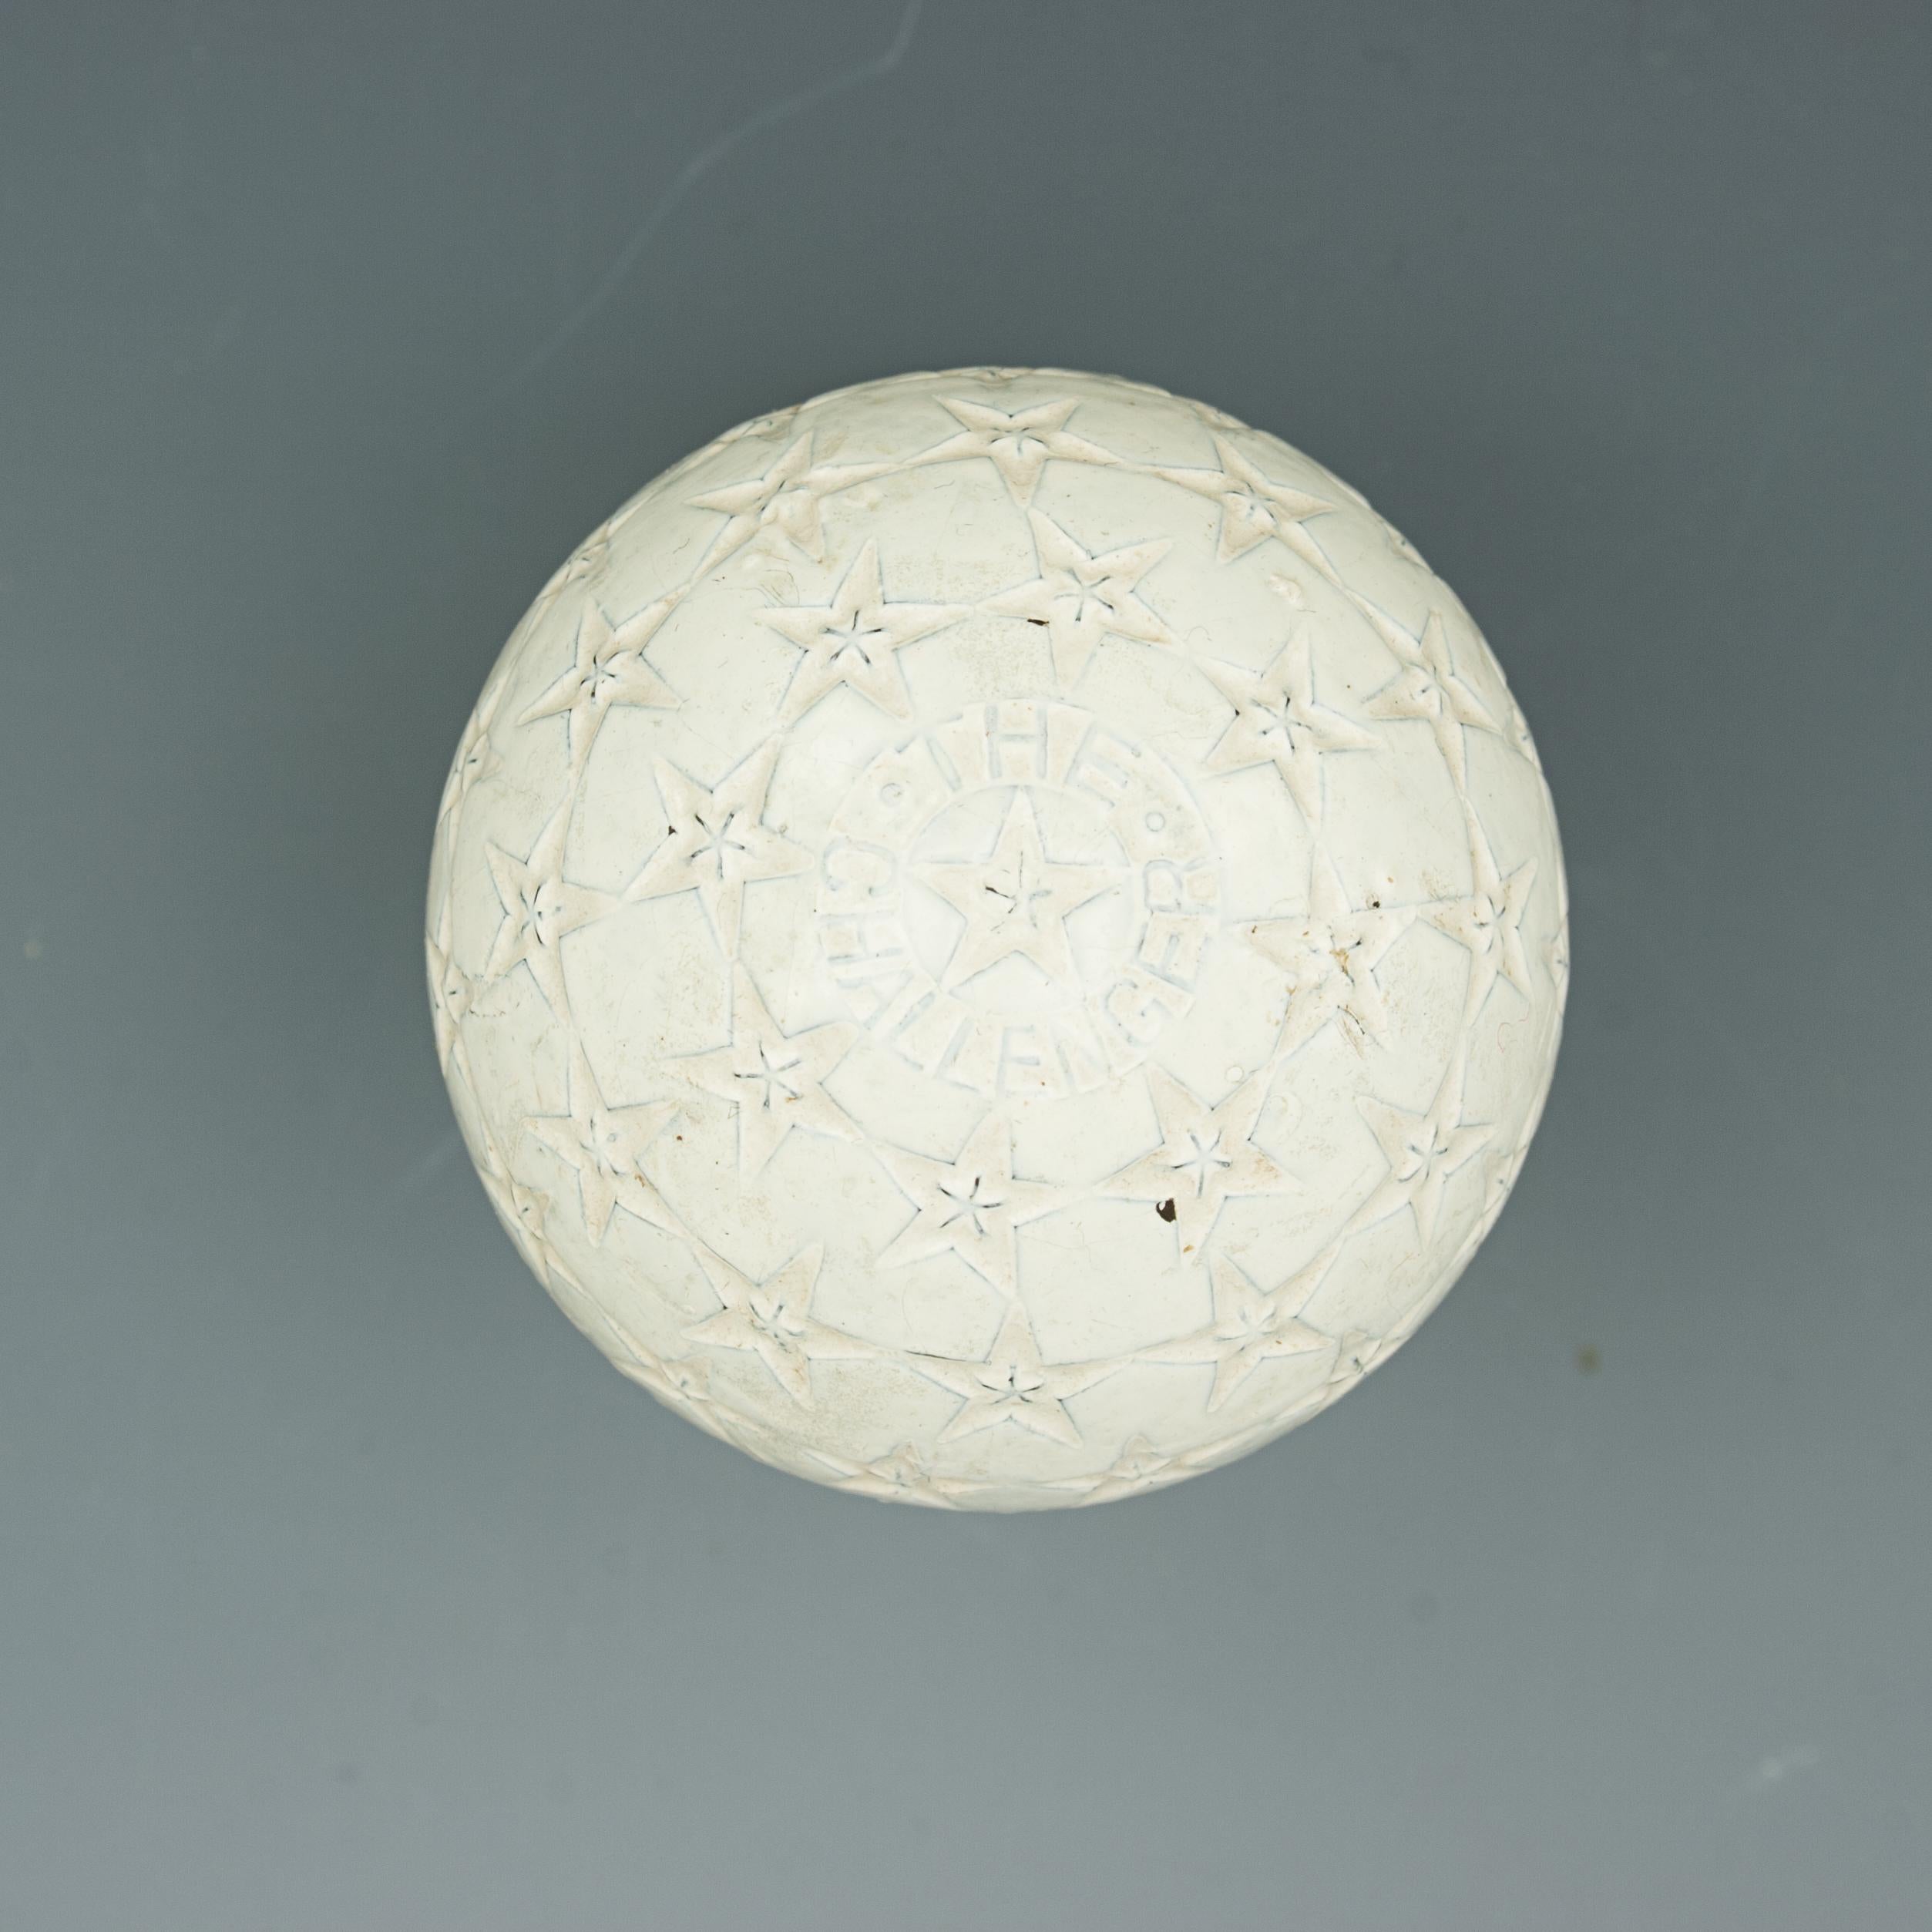 Early 20th Century Antique Golf Ball Star Challenger, Rubber Core, Star Design Pattern